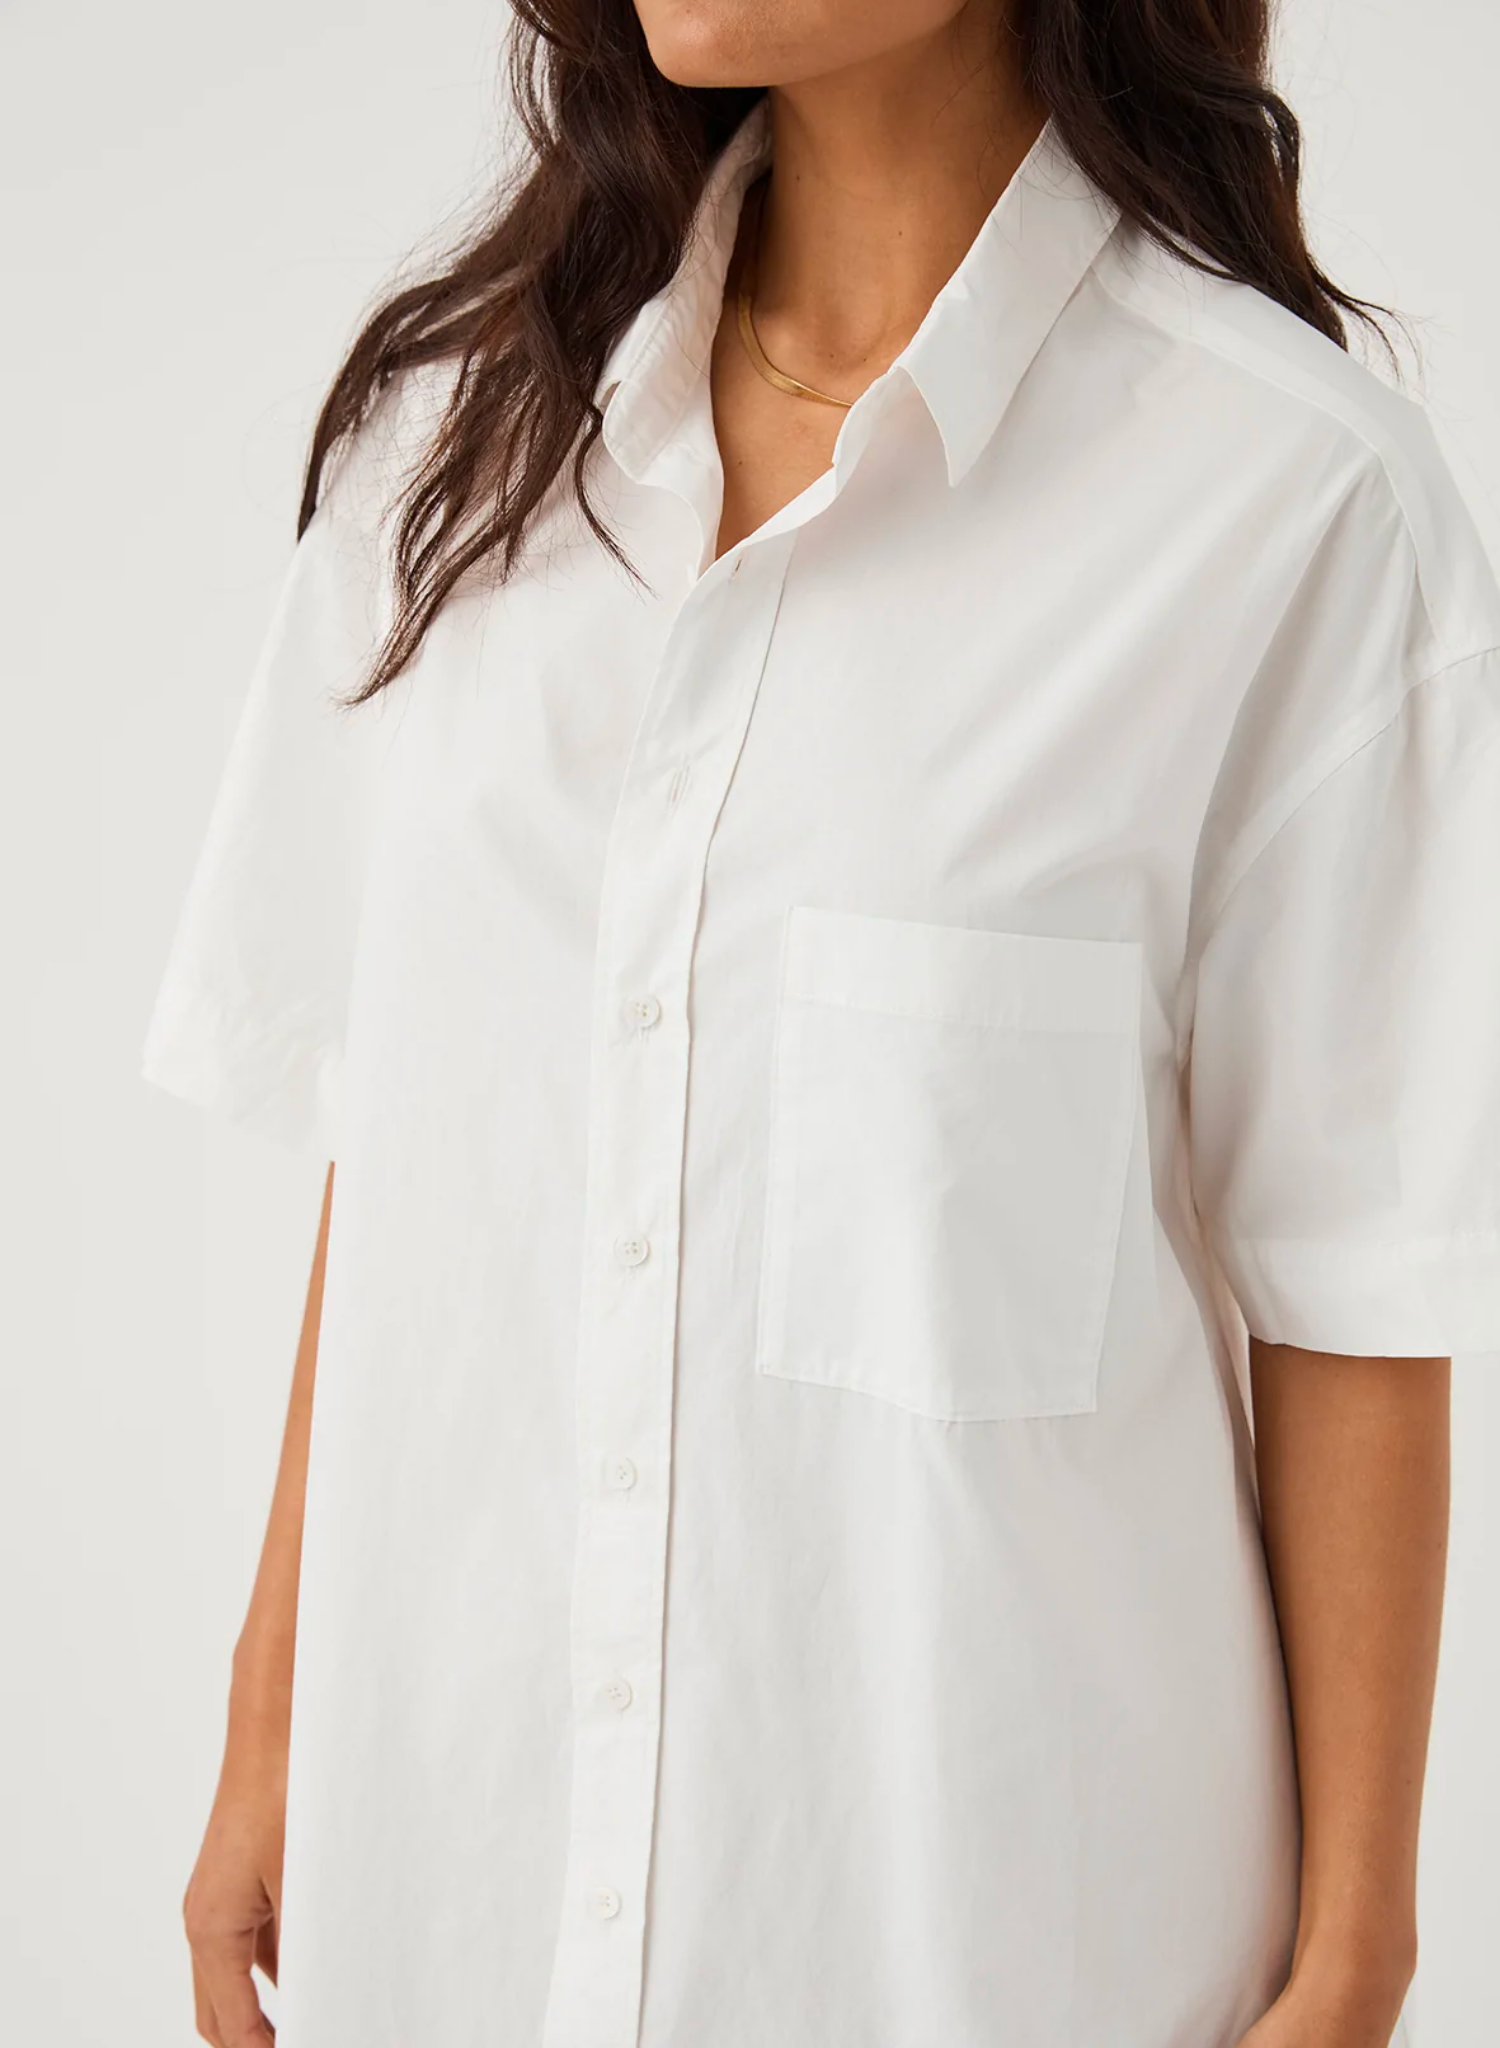 Button Down Front Front Pockets Short Sleeve Oversized Shirt Dress Mid Thigh Length Premium Poplin Fabric Ethically produced Free of harmful chemicals: OEKO-TEX Standard 100 100%  GOTS Certified Organic Cotton